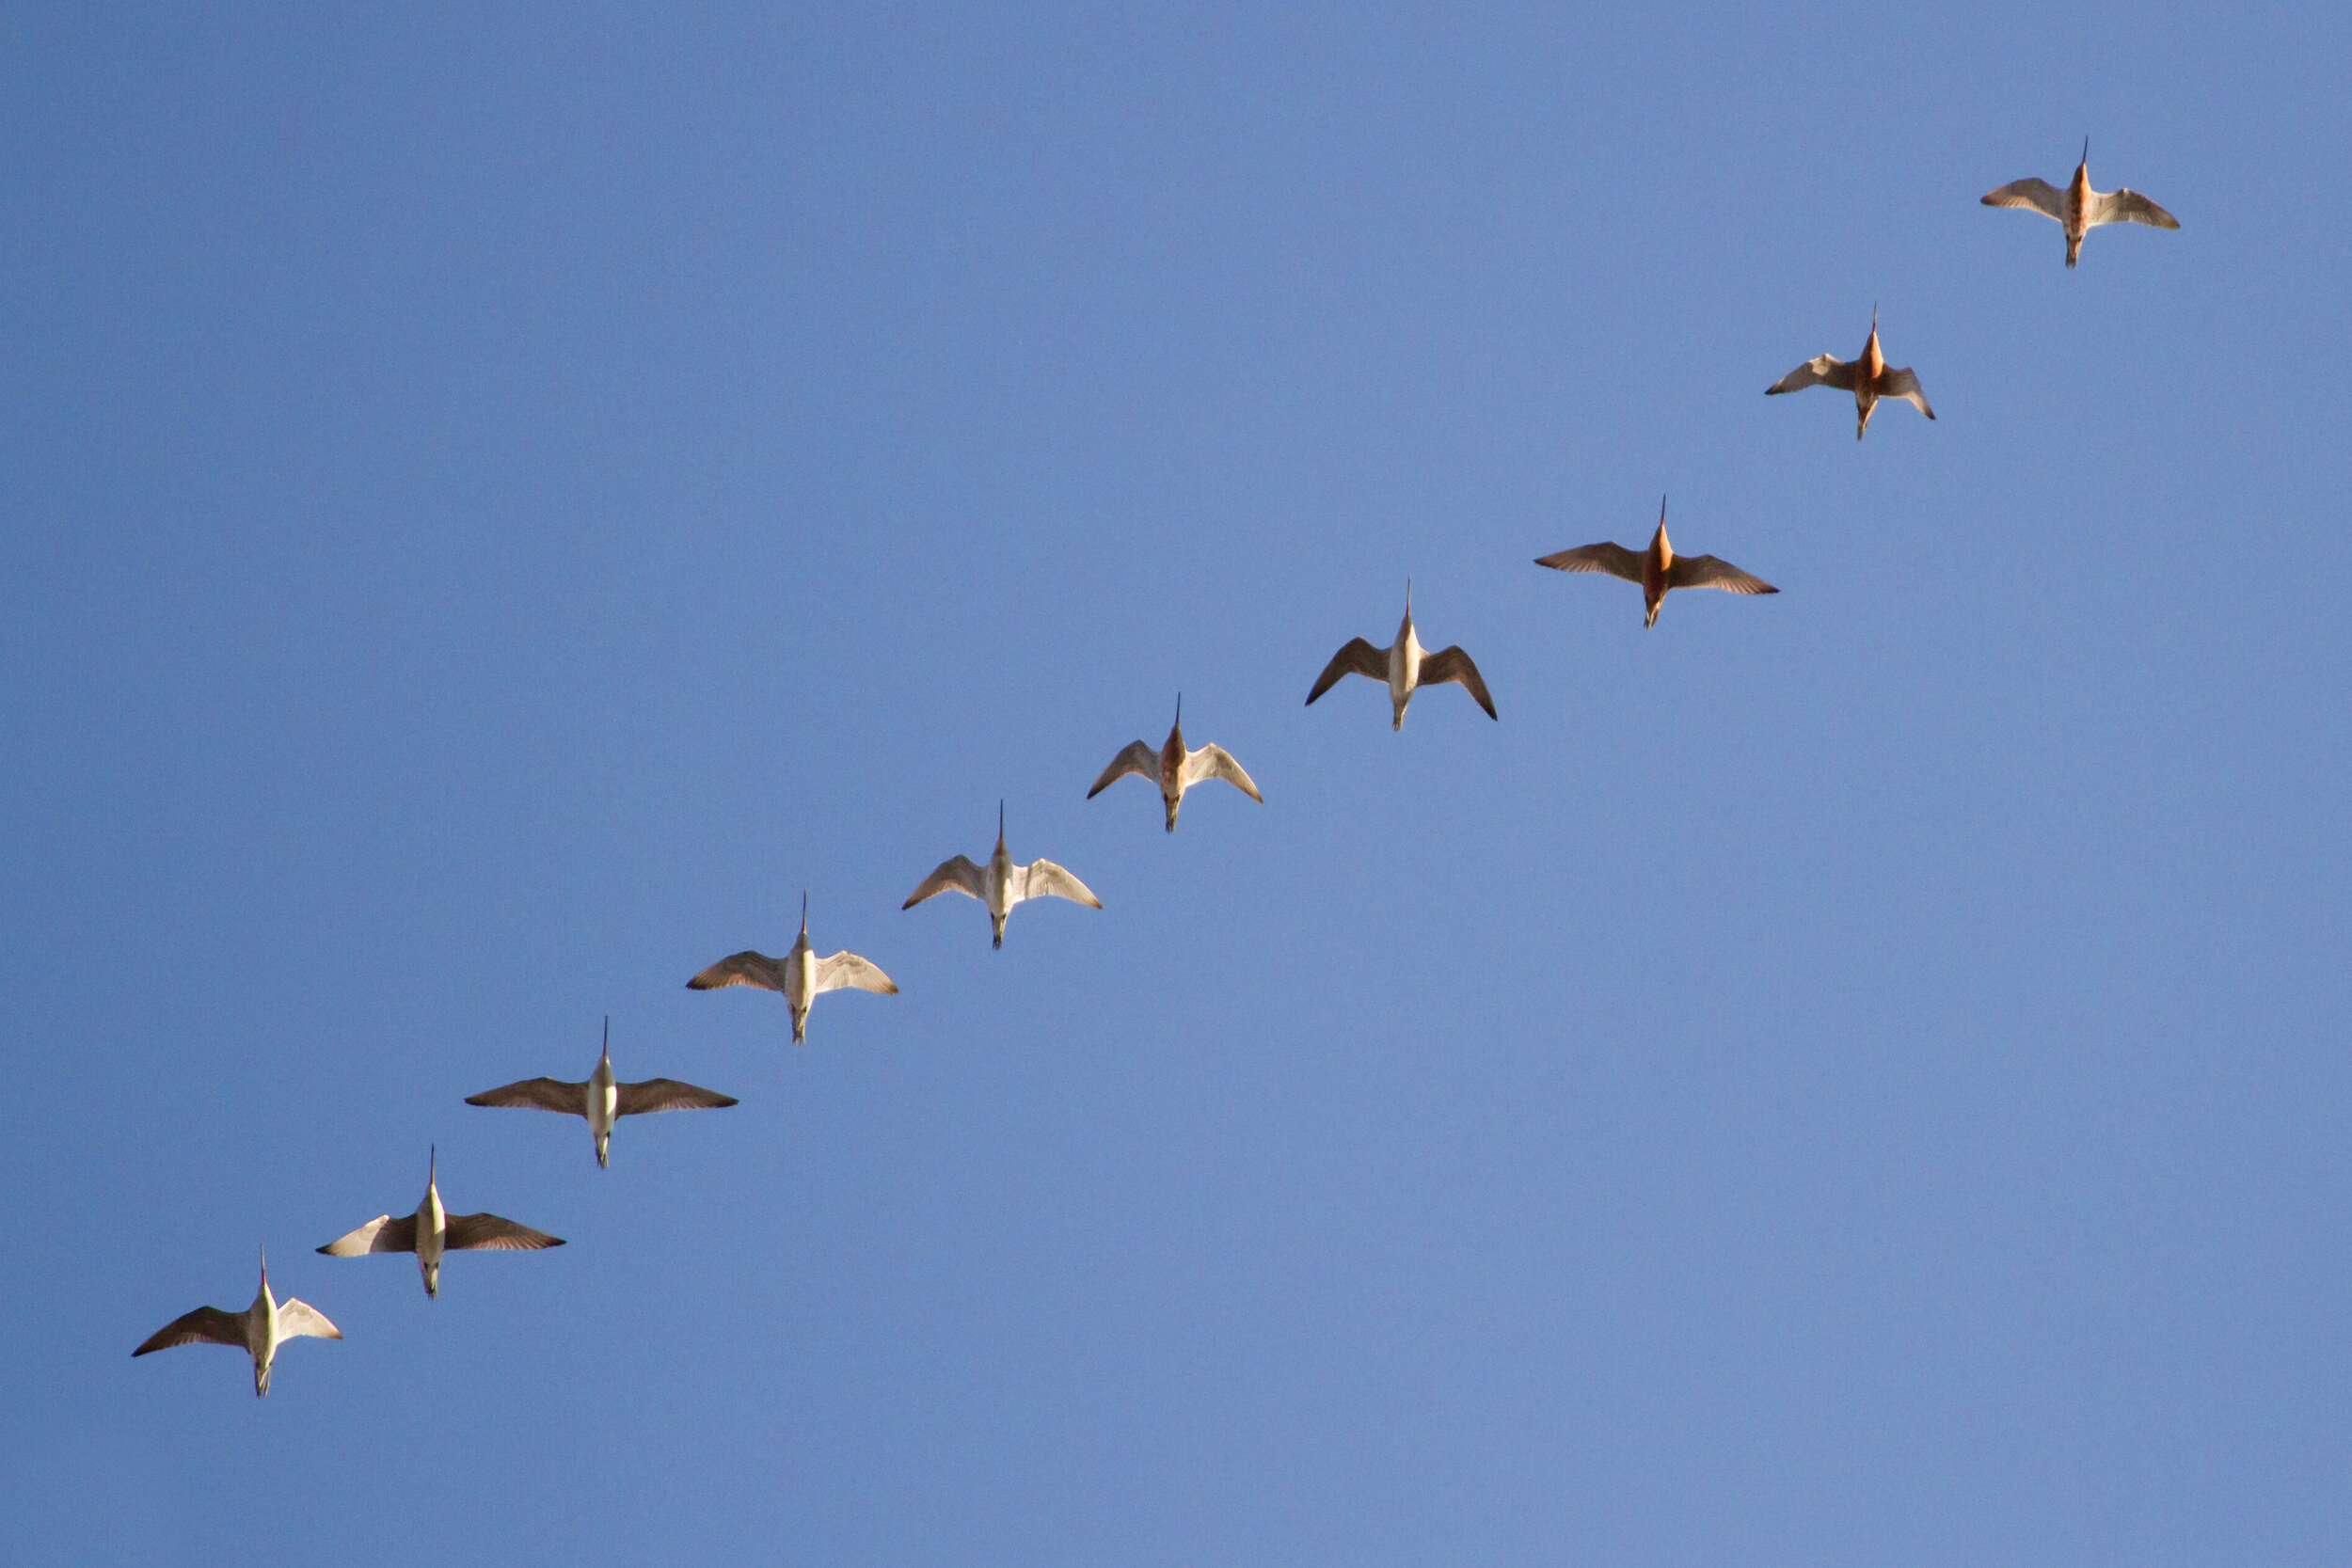 Broome2015_Bar-tailed Godwit migration watch1a.jpg